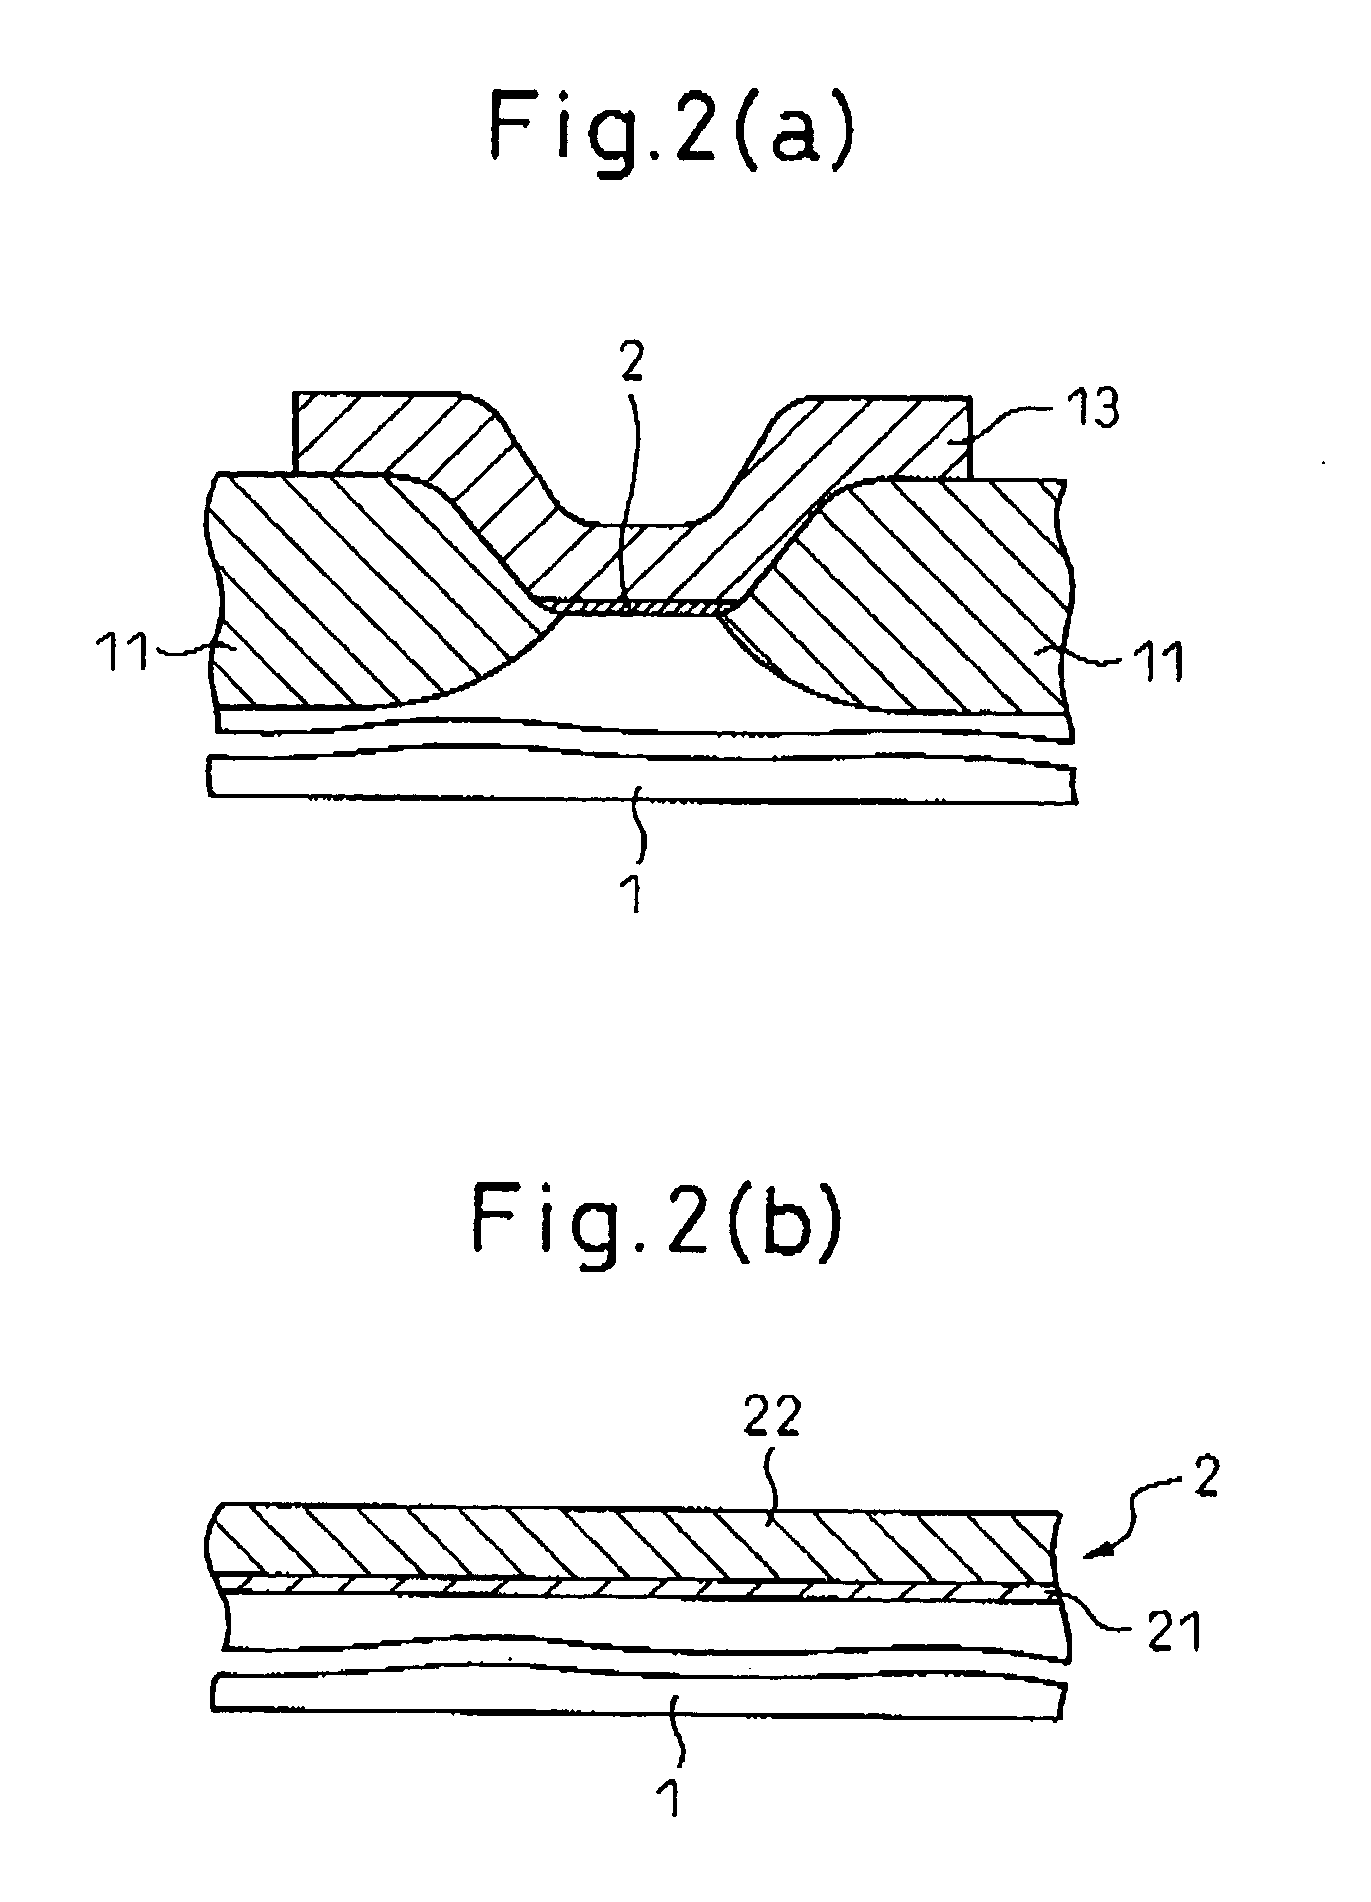 Material for electronic device and process for producing the same